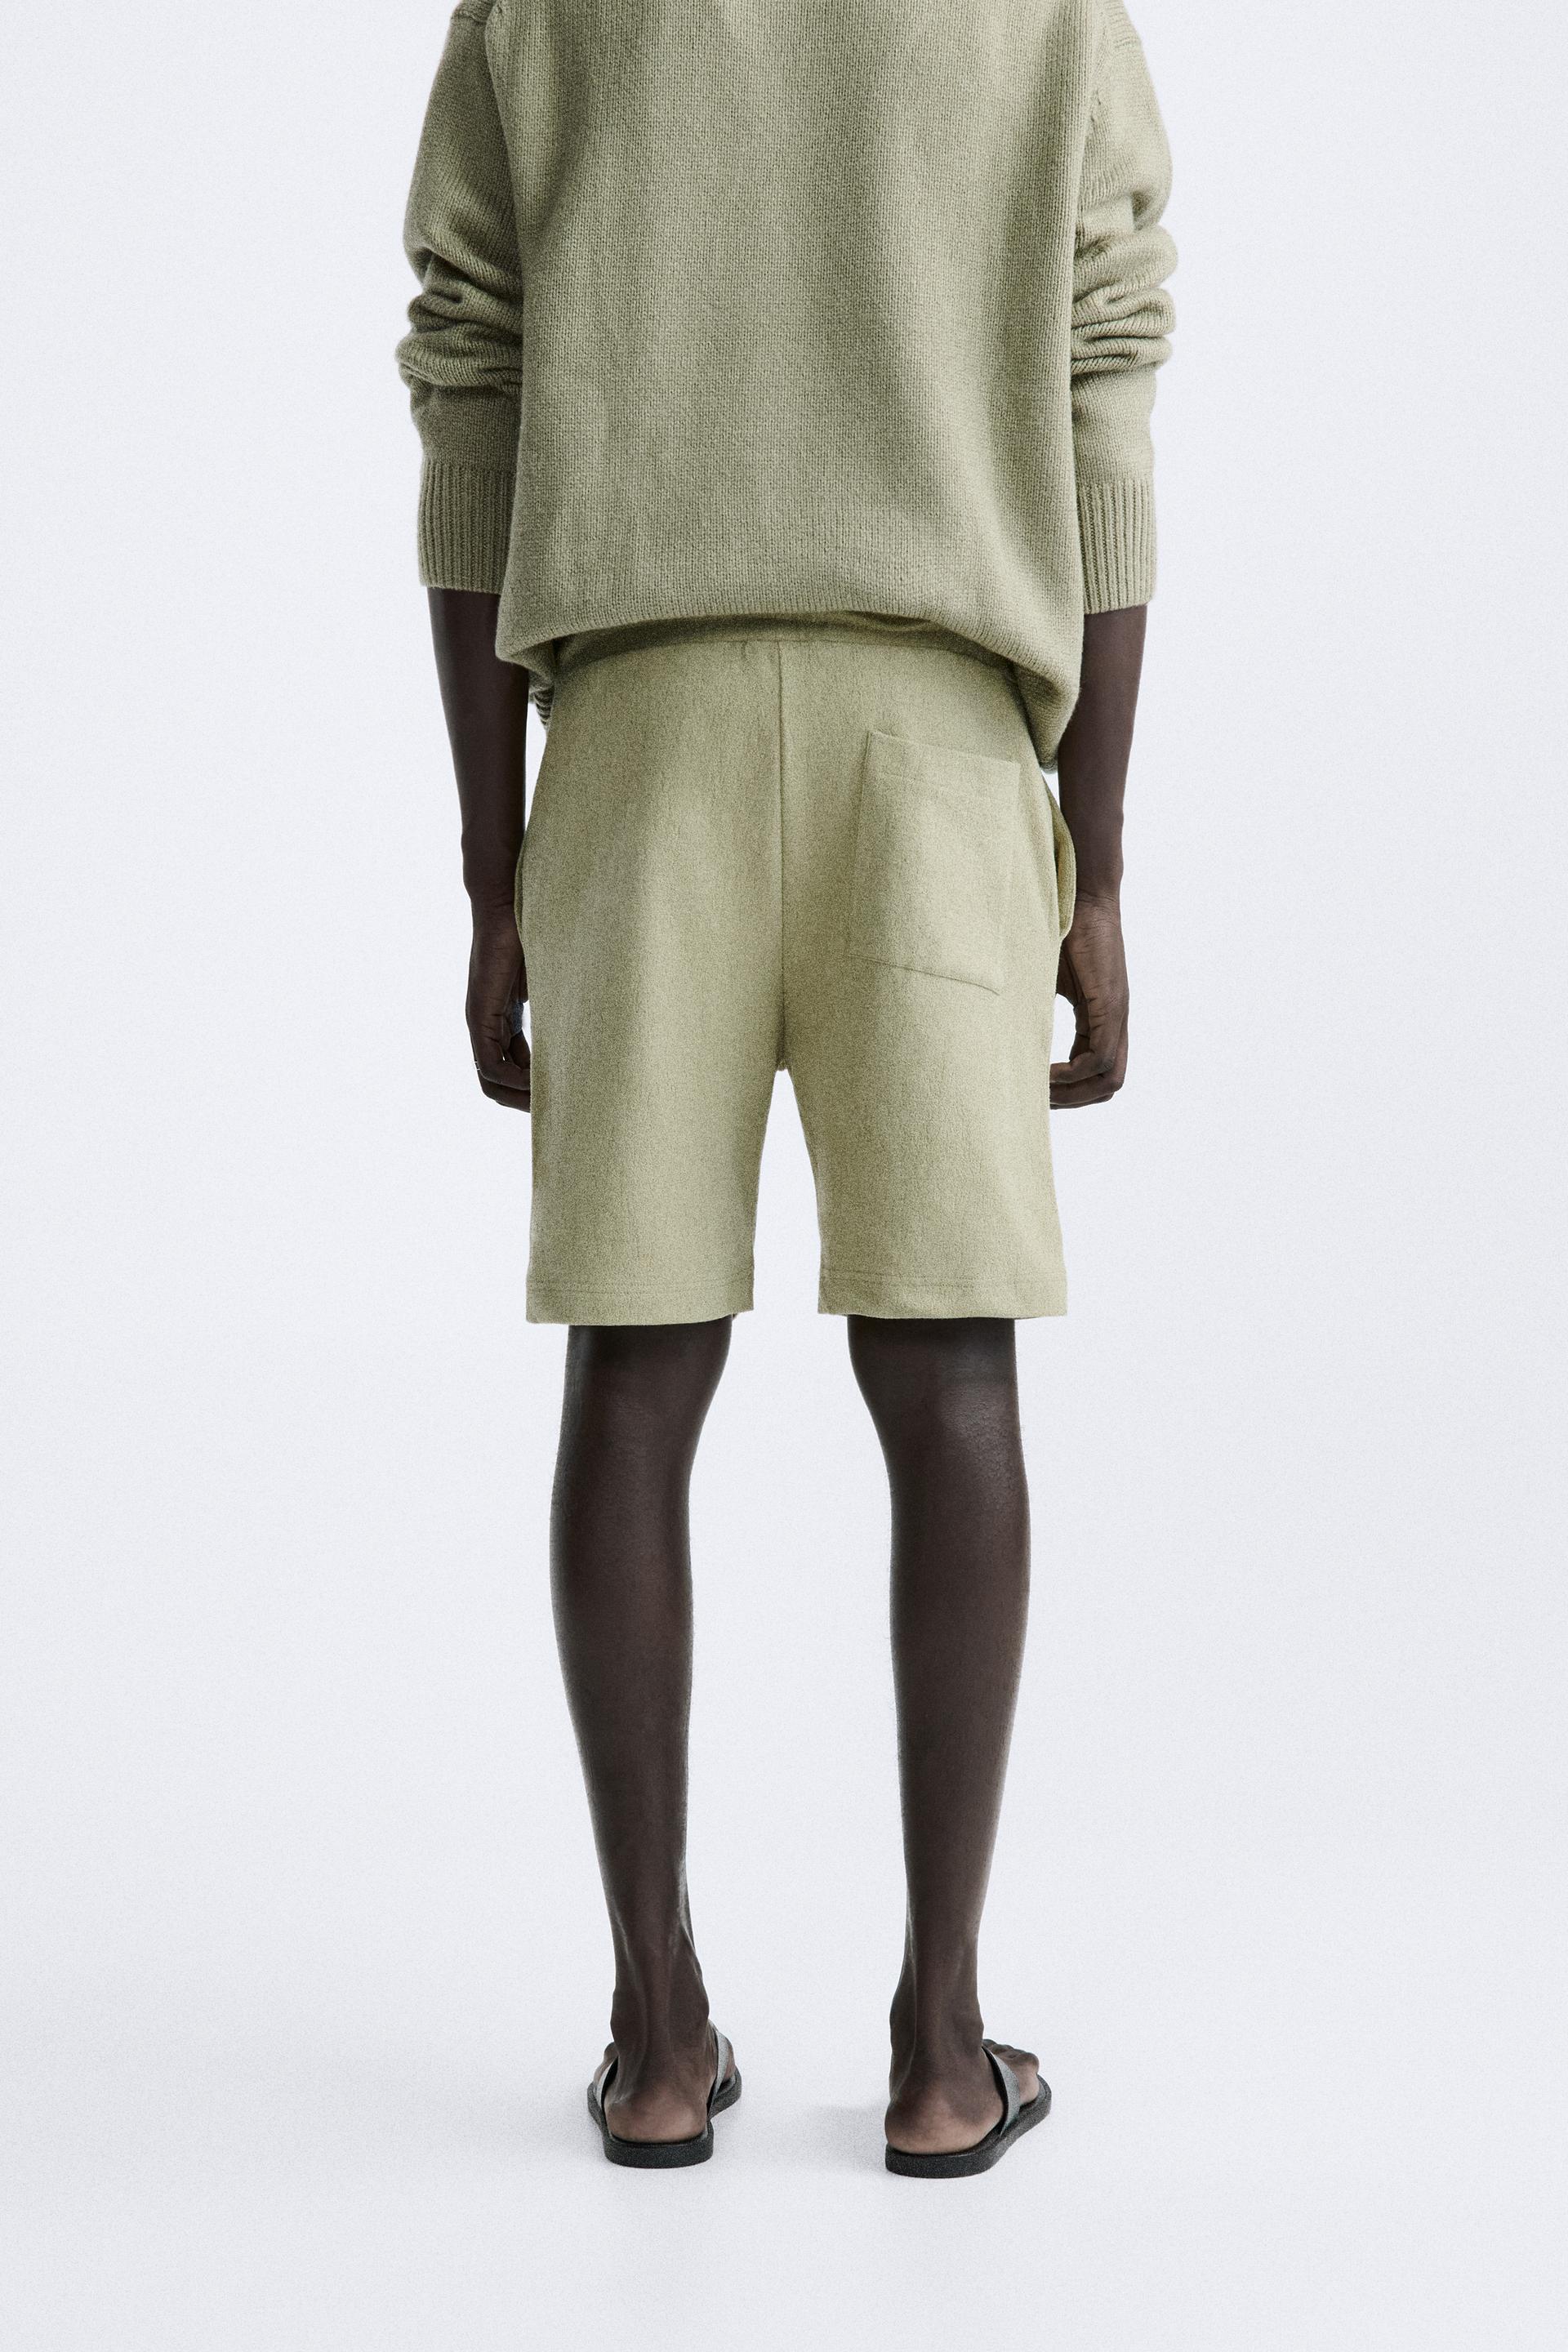 TEXTURED COTTON SHORTS - Oyster-white